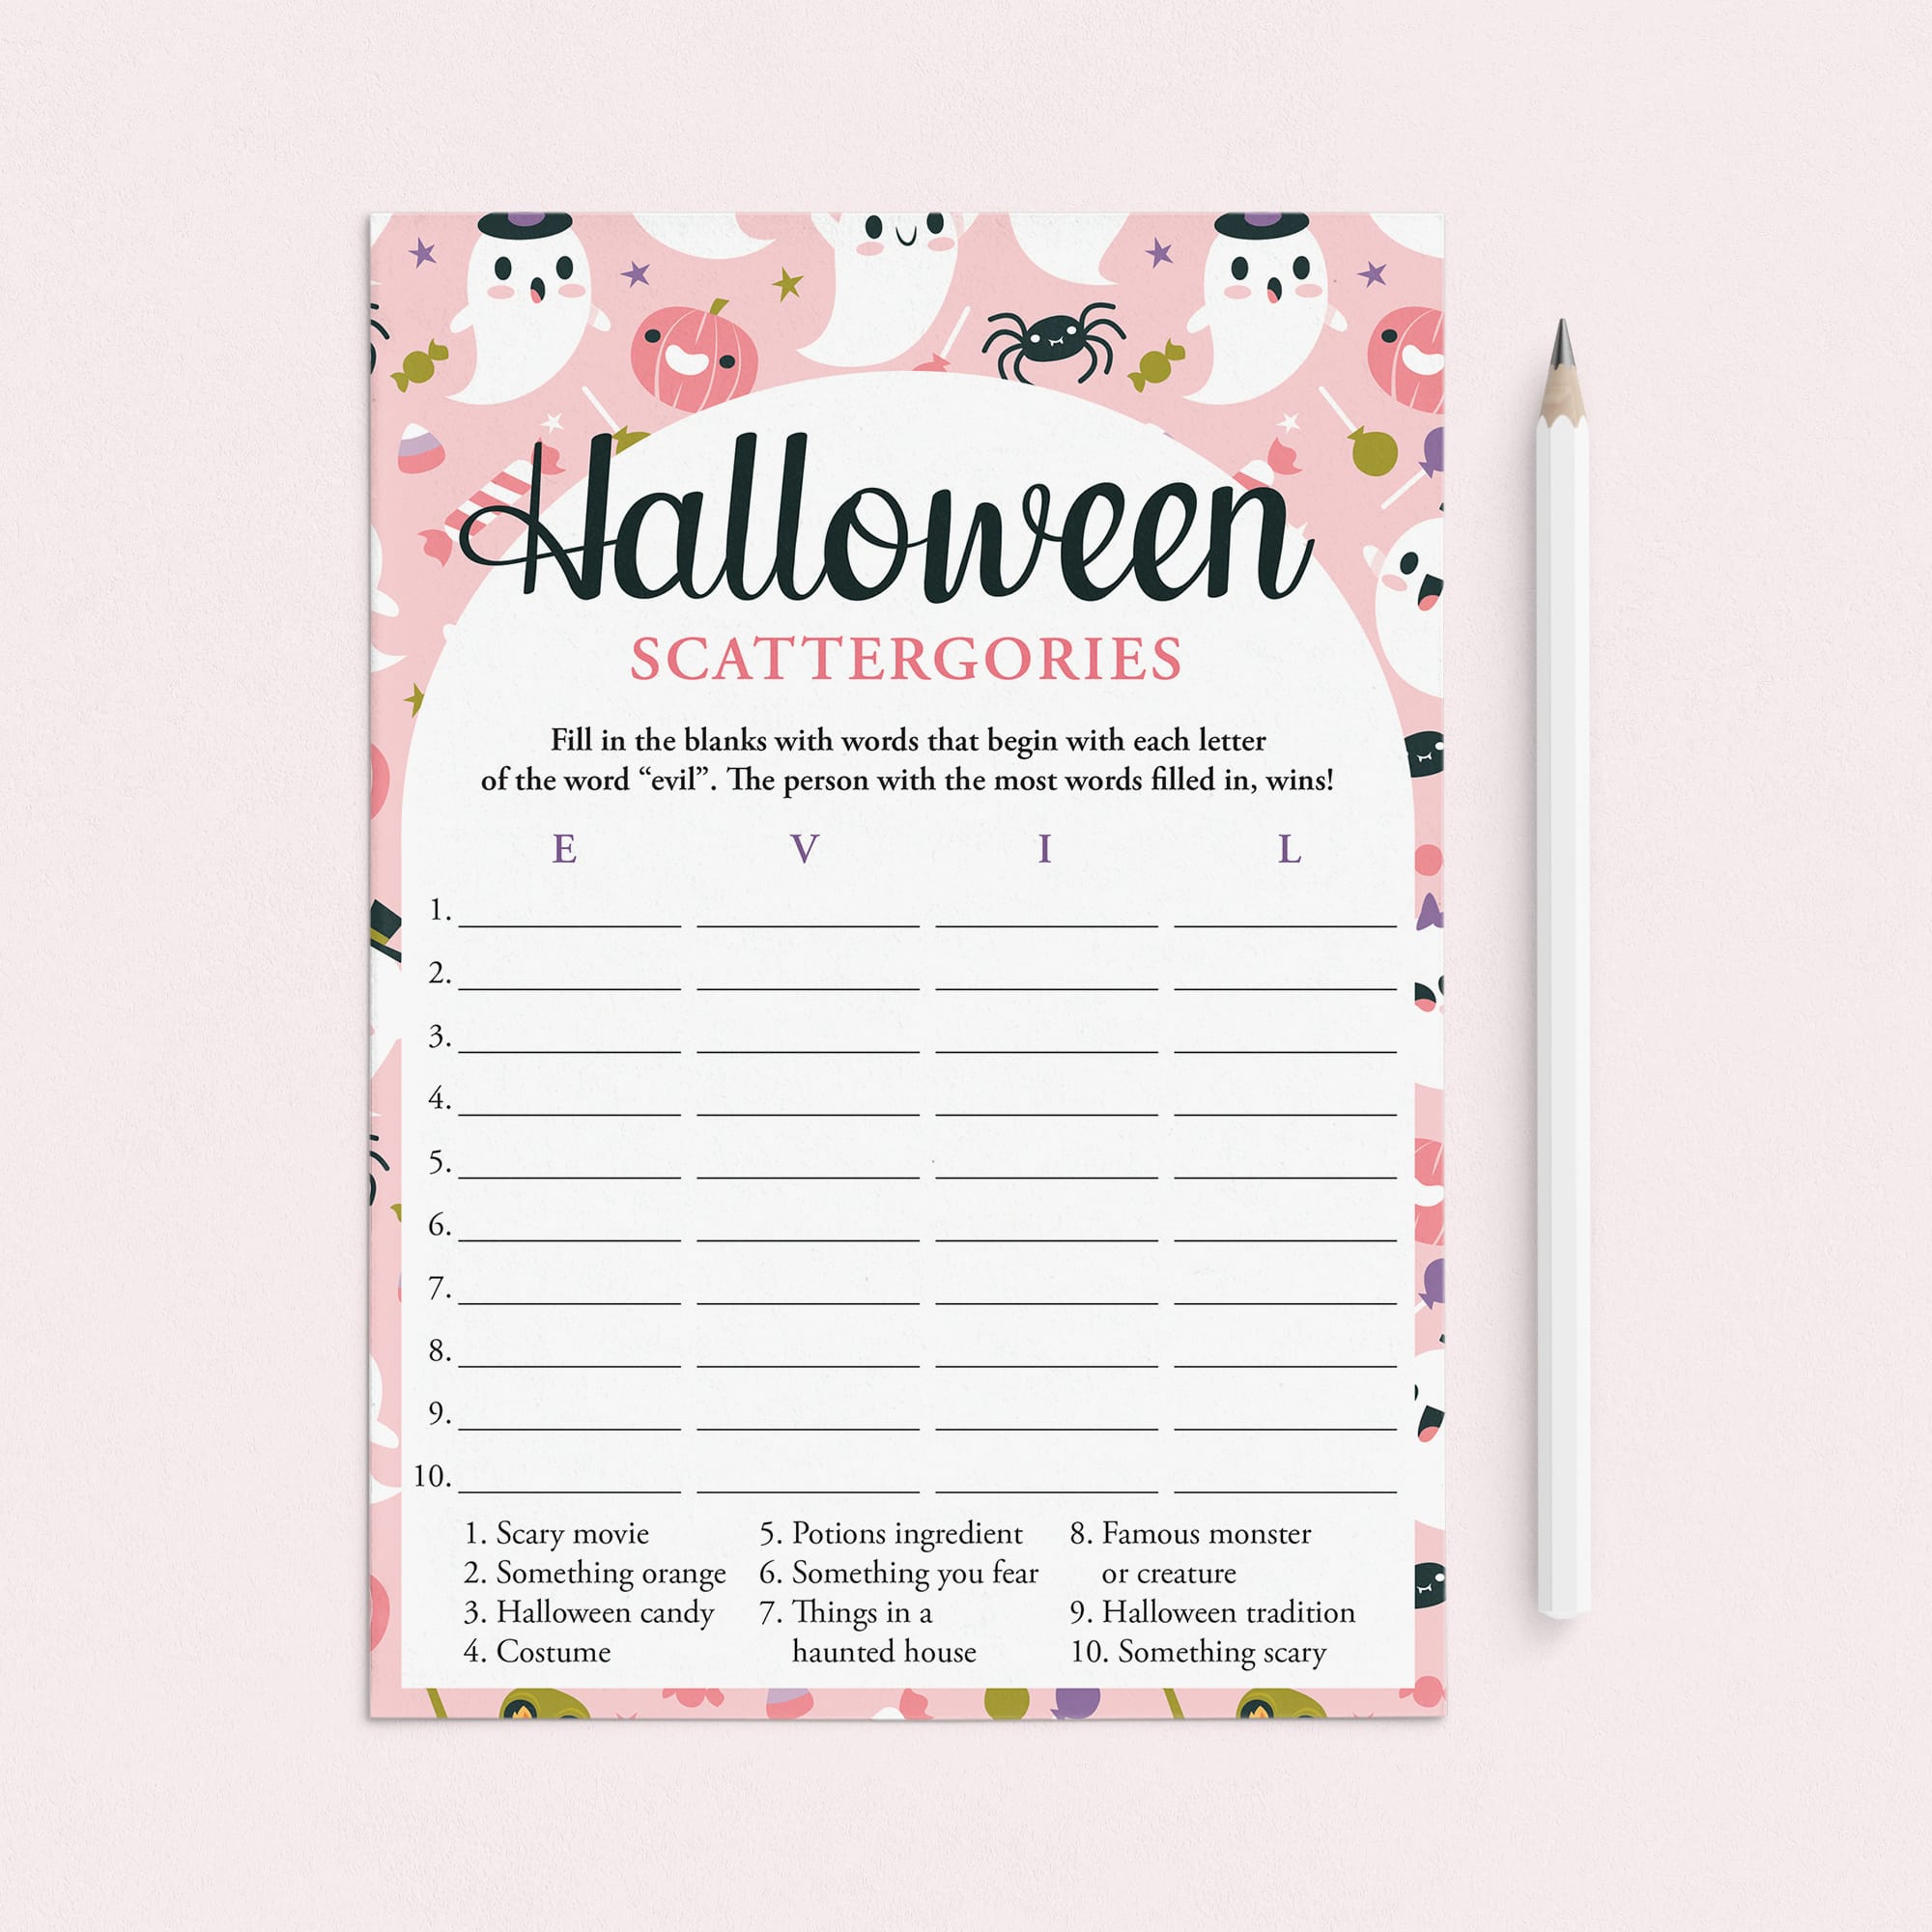 Pink Ghosts Halloween Party Game Scattergories Printable by LittleSizzle